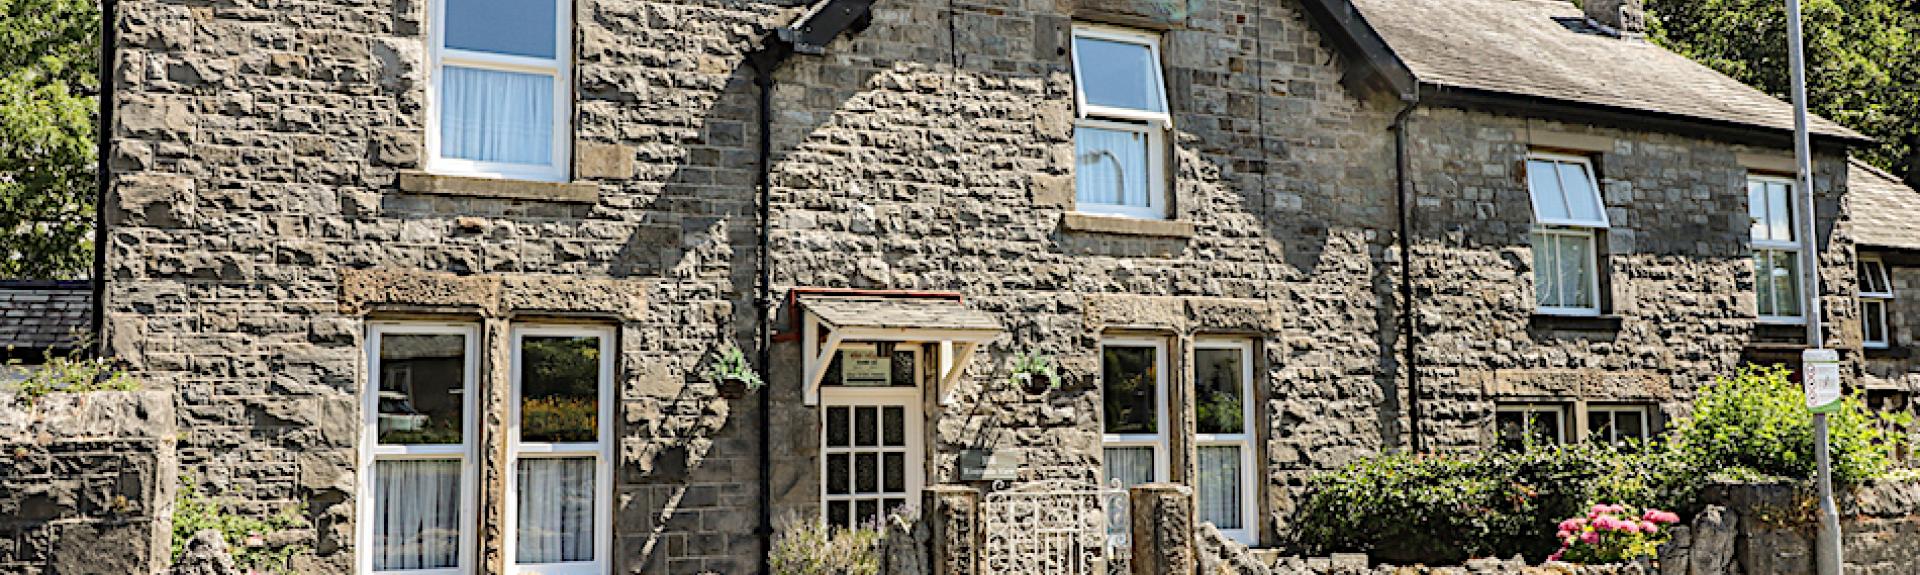 Stone built Cumbrian holiday cottage with a front garden behind a low stone wall.